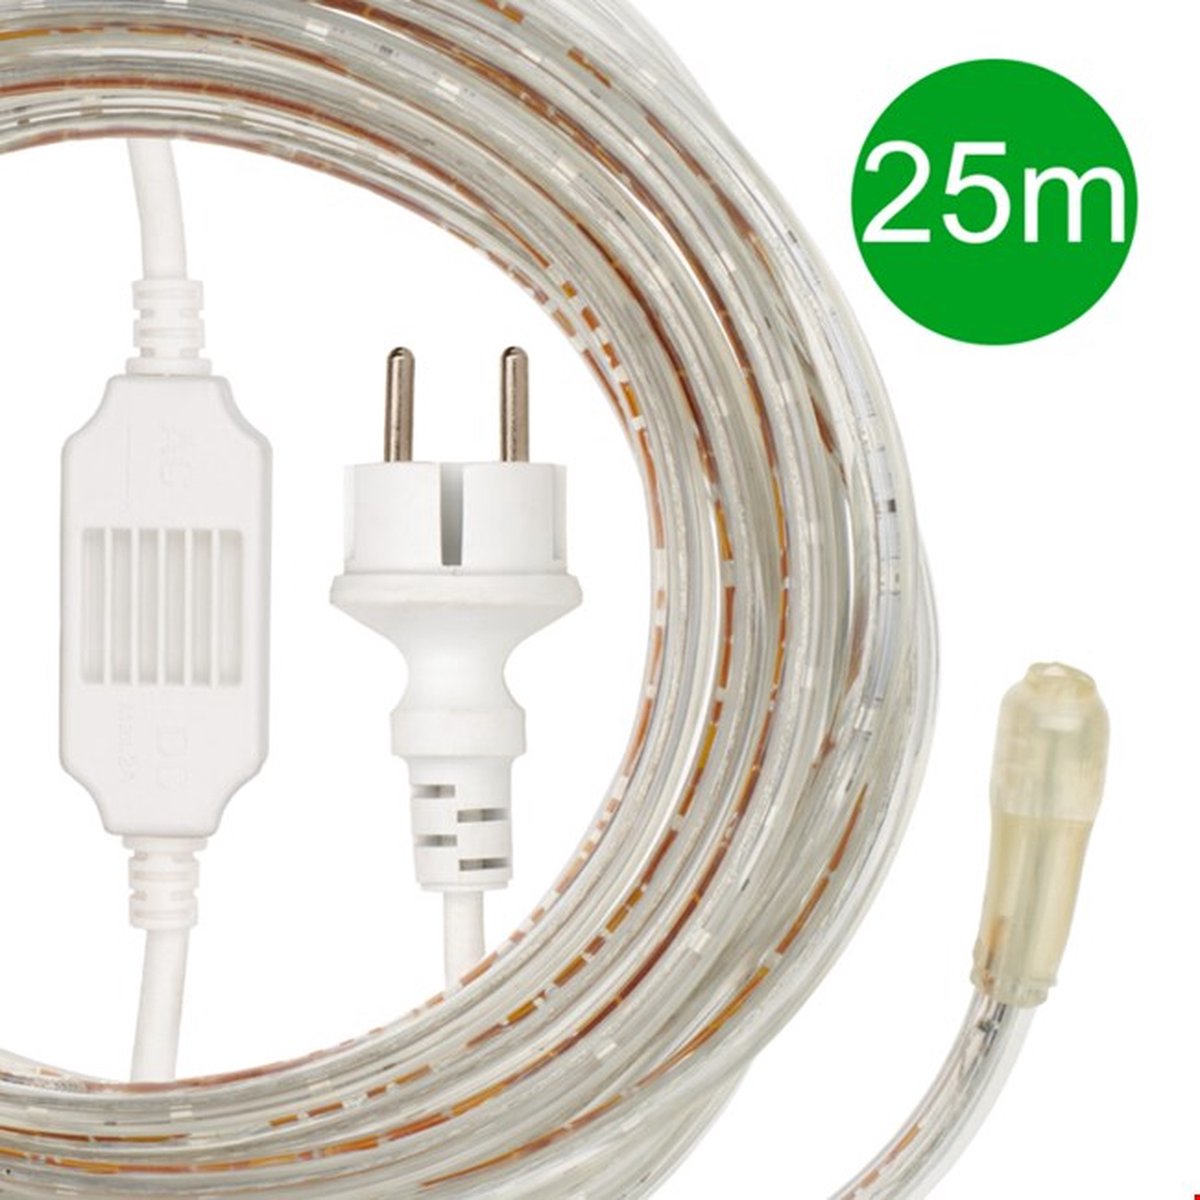 Bailey BAI RoBust LED Rope - 25M - 170lm/m - groen - IP65 - excl. AC/DC adapter - Bailey